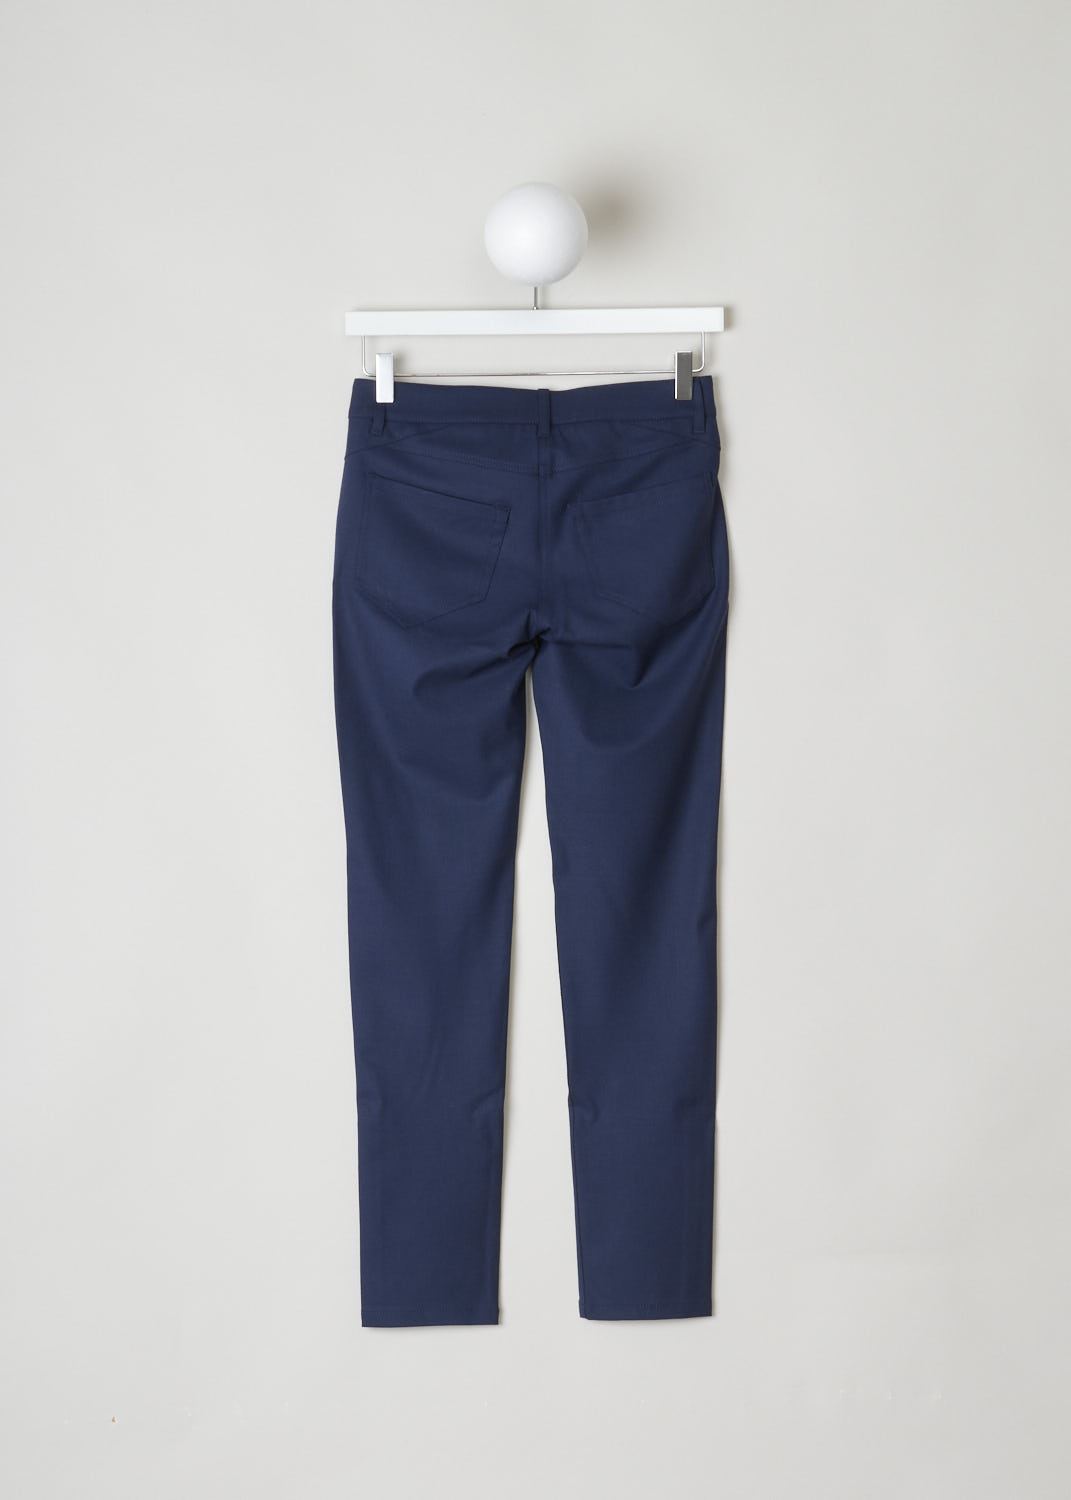 BRUNELLO CUCINELLI, NAVY BLUE WOOL PANTS, M0L15P1790_C2632, Blue, Back, Form fitting dark blue pants made with a wool blend. These pants have a waistband with belt loops and a single button and concealed zipper closure. These pants have a traditional five pocket configuration, meaning in the front there are two rounded pockets and a single coin pocket, and two pockets in the back.
